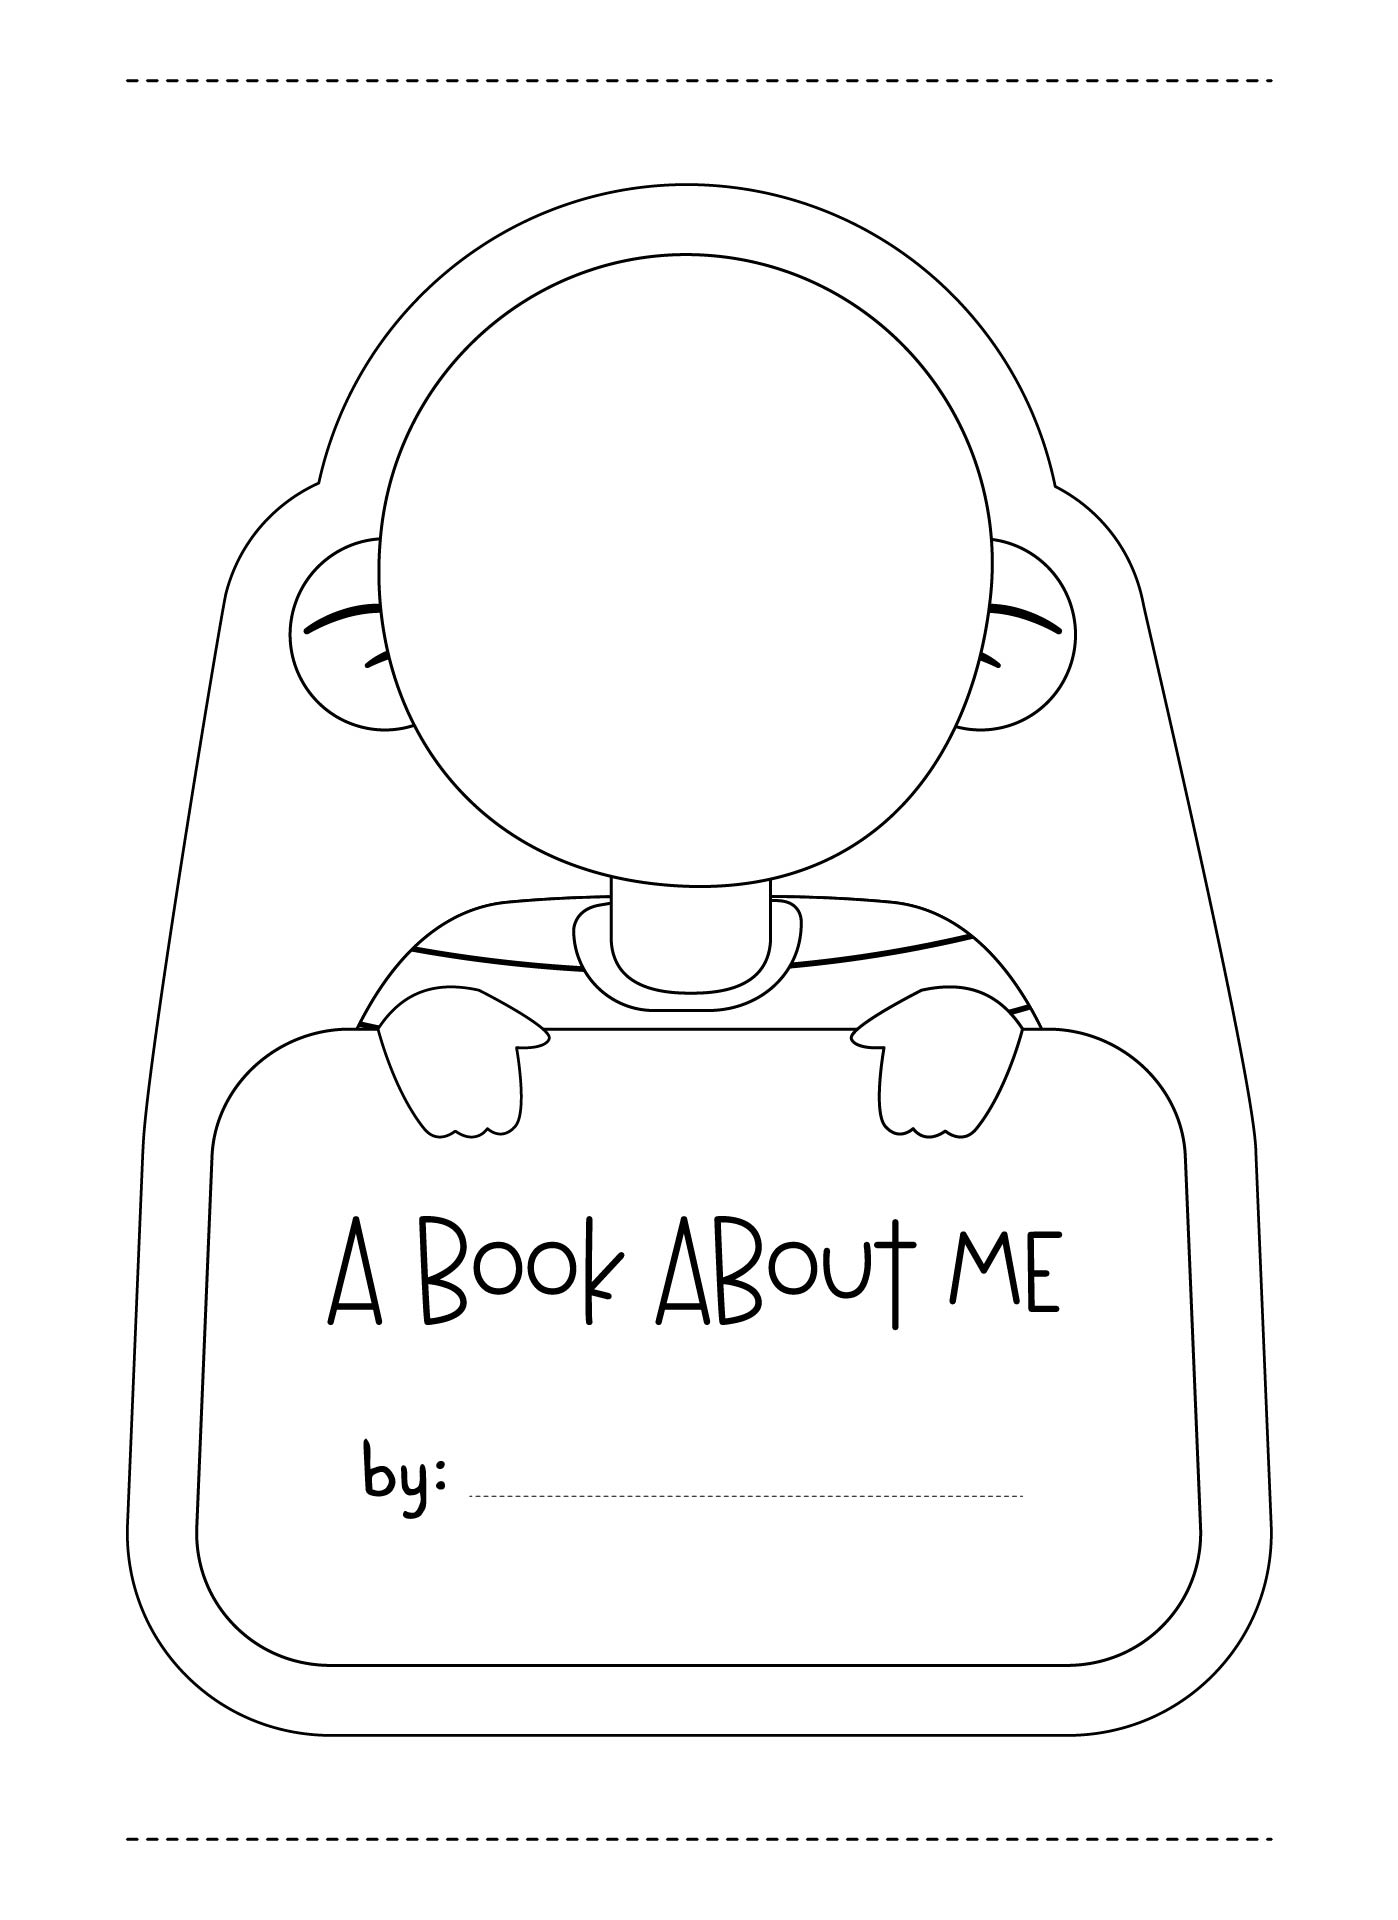 4-best-images-of-a-book-about-me-printable-all-about-me-printable